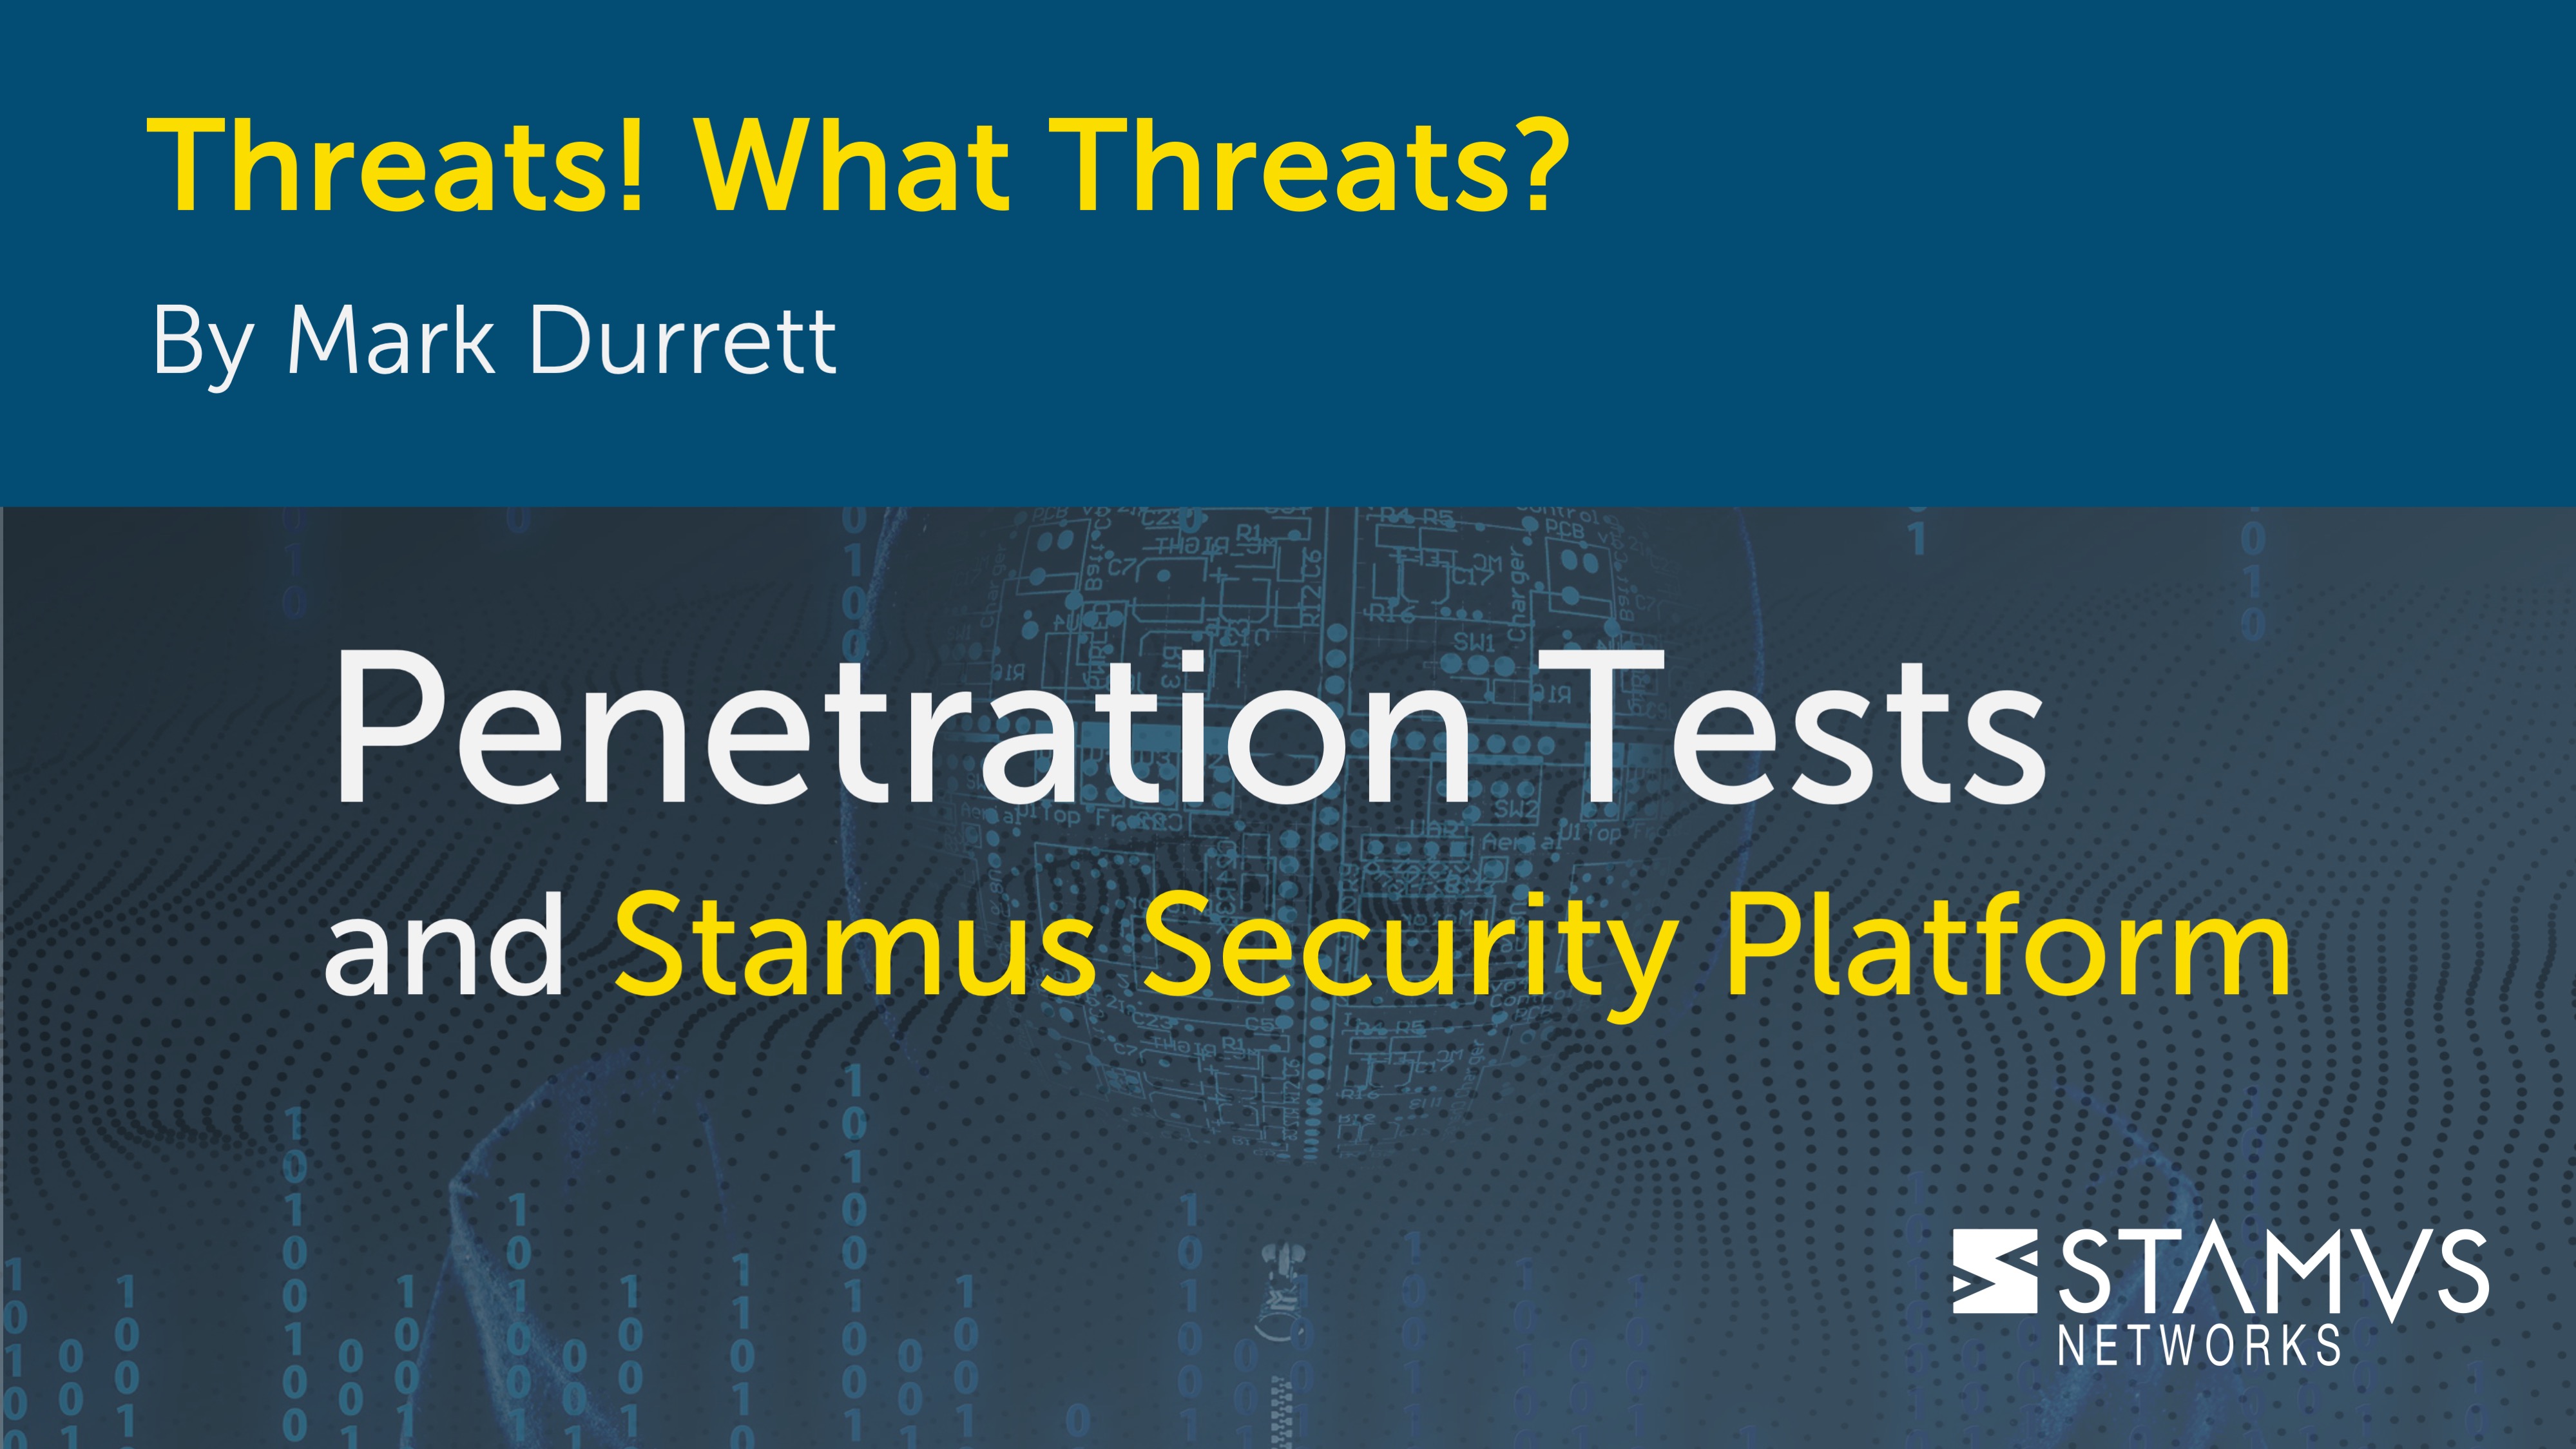 Threats! What Threats? Penetration Tests and Stamus Security Platform by Mark Durrett